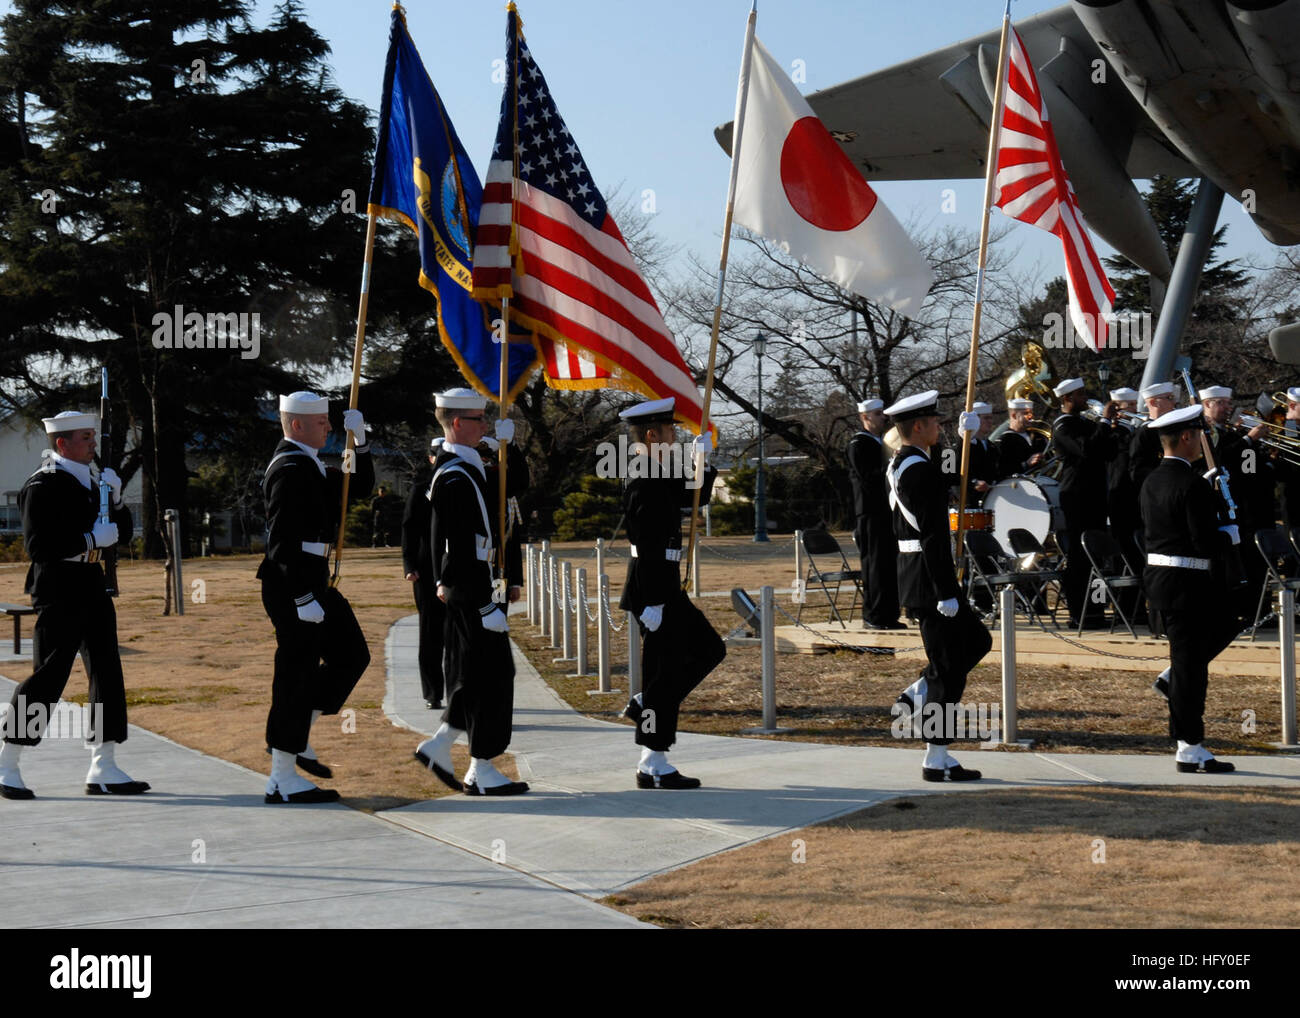 100119-N-5019M-002  ATSUGI, Japan (Jan. 19, 2010) The U.S. Navy and Japan Maritime Self-Defense Force joint honor guard parades the colors at a dedication ceremony for Alliance Park at Naval Air Facility Atsugi. The park dedication celebrated the 50th anniversary of the signing of the Treaty of Mutual Cooperation and Security between the U.S. and Japan. Signed and ratified in 1960, the treaty serves as a foundation for the strong alliance and interoperability between the U.S. Navy and the Japan Maritime Self-Defense Force. (U.S. Navy photo by Mass Communication Specialist Seaman Mike R. Mulcar Stock Photo